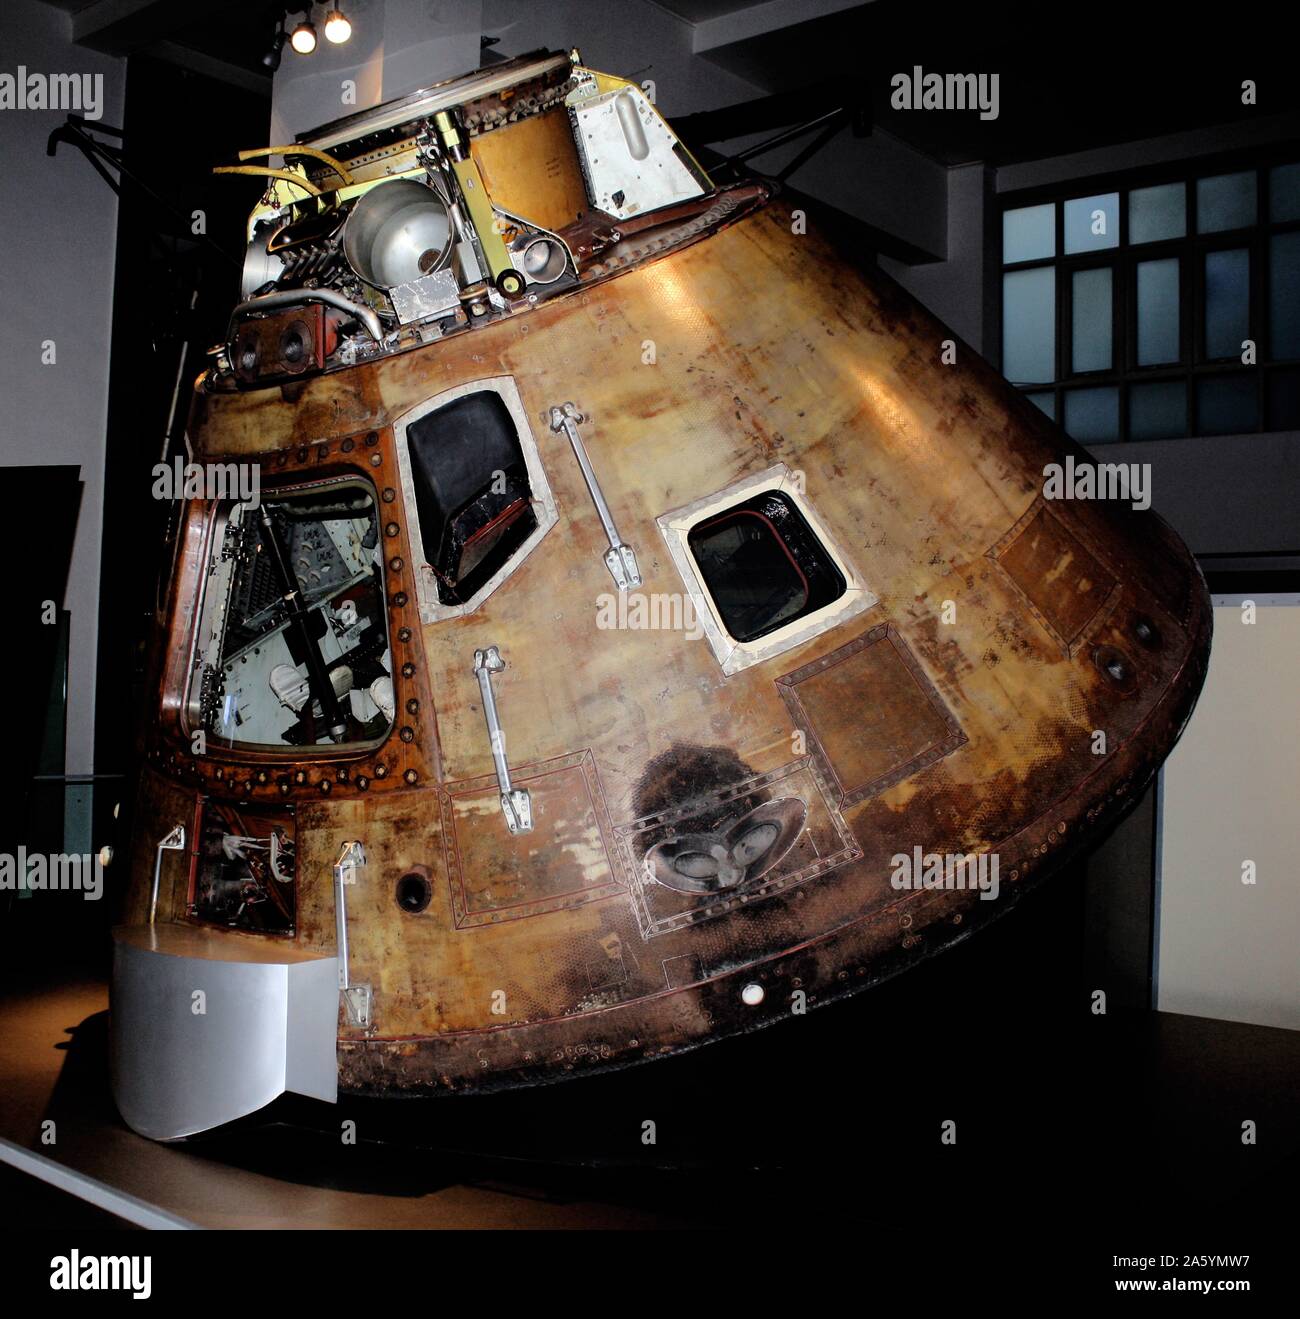 Apollo 10 Command Module. Circa 1969. The capsule in which astronauts Tom Stafford, John Young and Gene Cernan travelled around the moon in 1969. Apollo 10 was a dry run for the Moon landing which followed it. Stock Photo